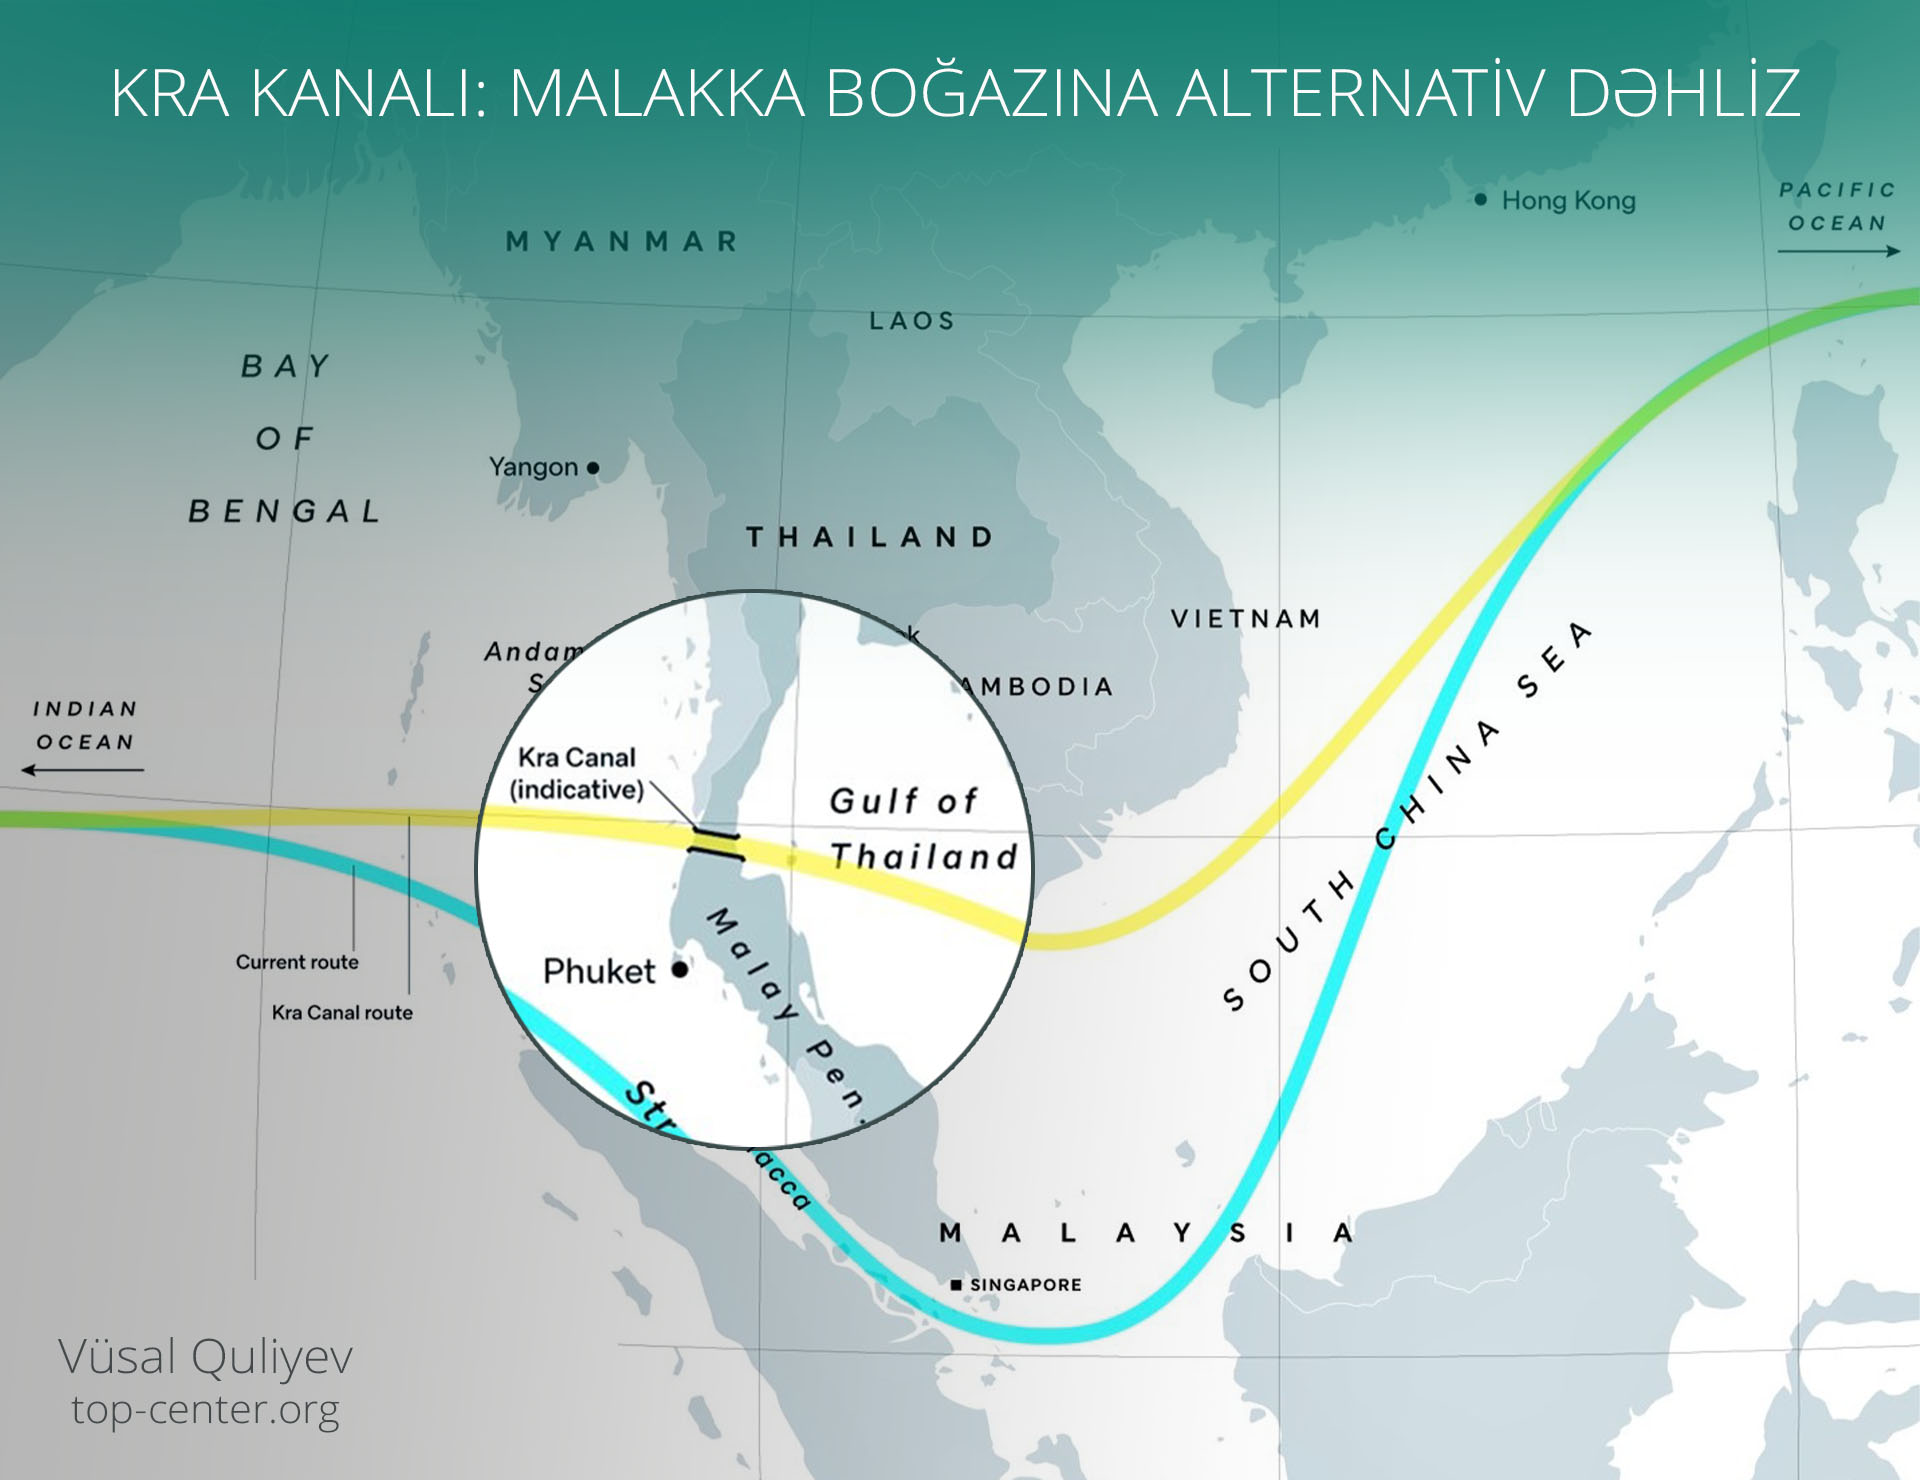 The Kra Canal as an alternative to the Strait of Malacca